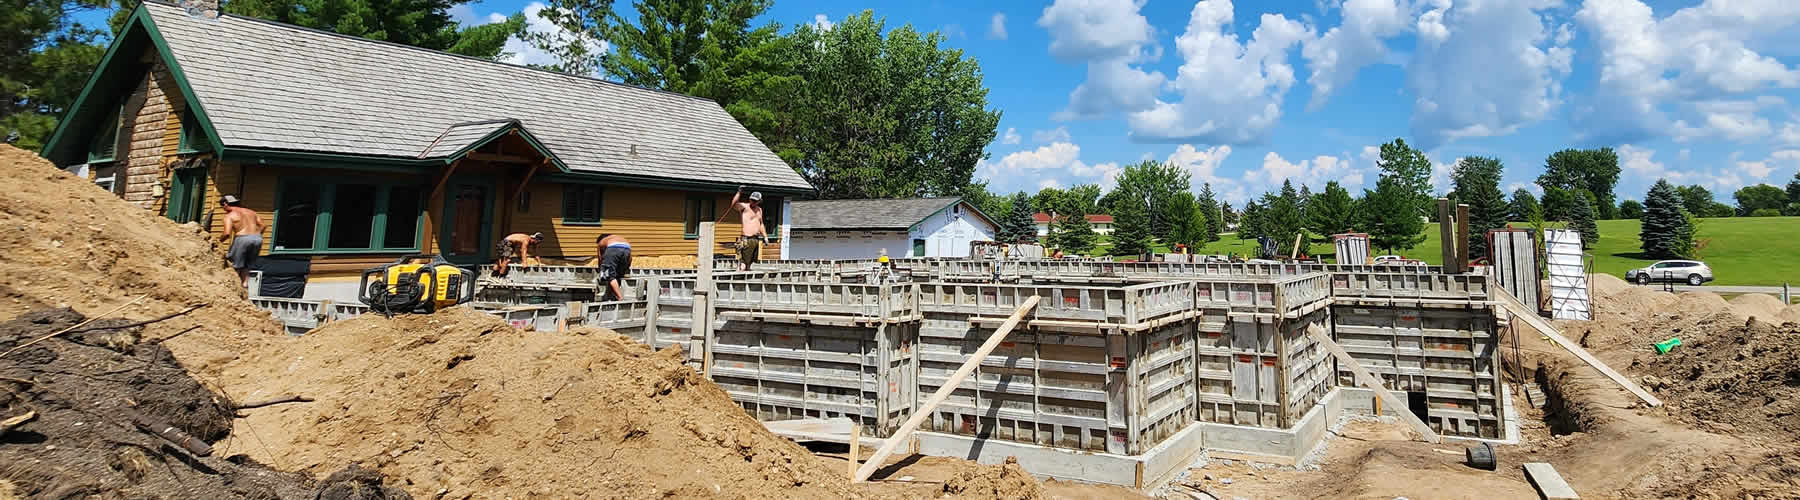 Opatril Concrete of Moorhead, Minnesota can help you with your concrete needs for remodeling.